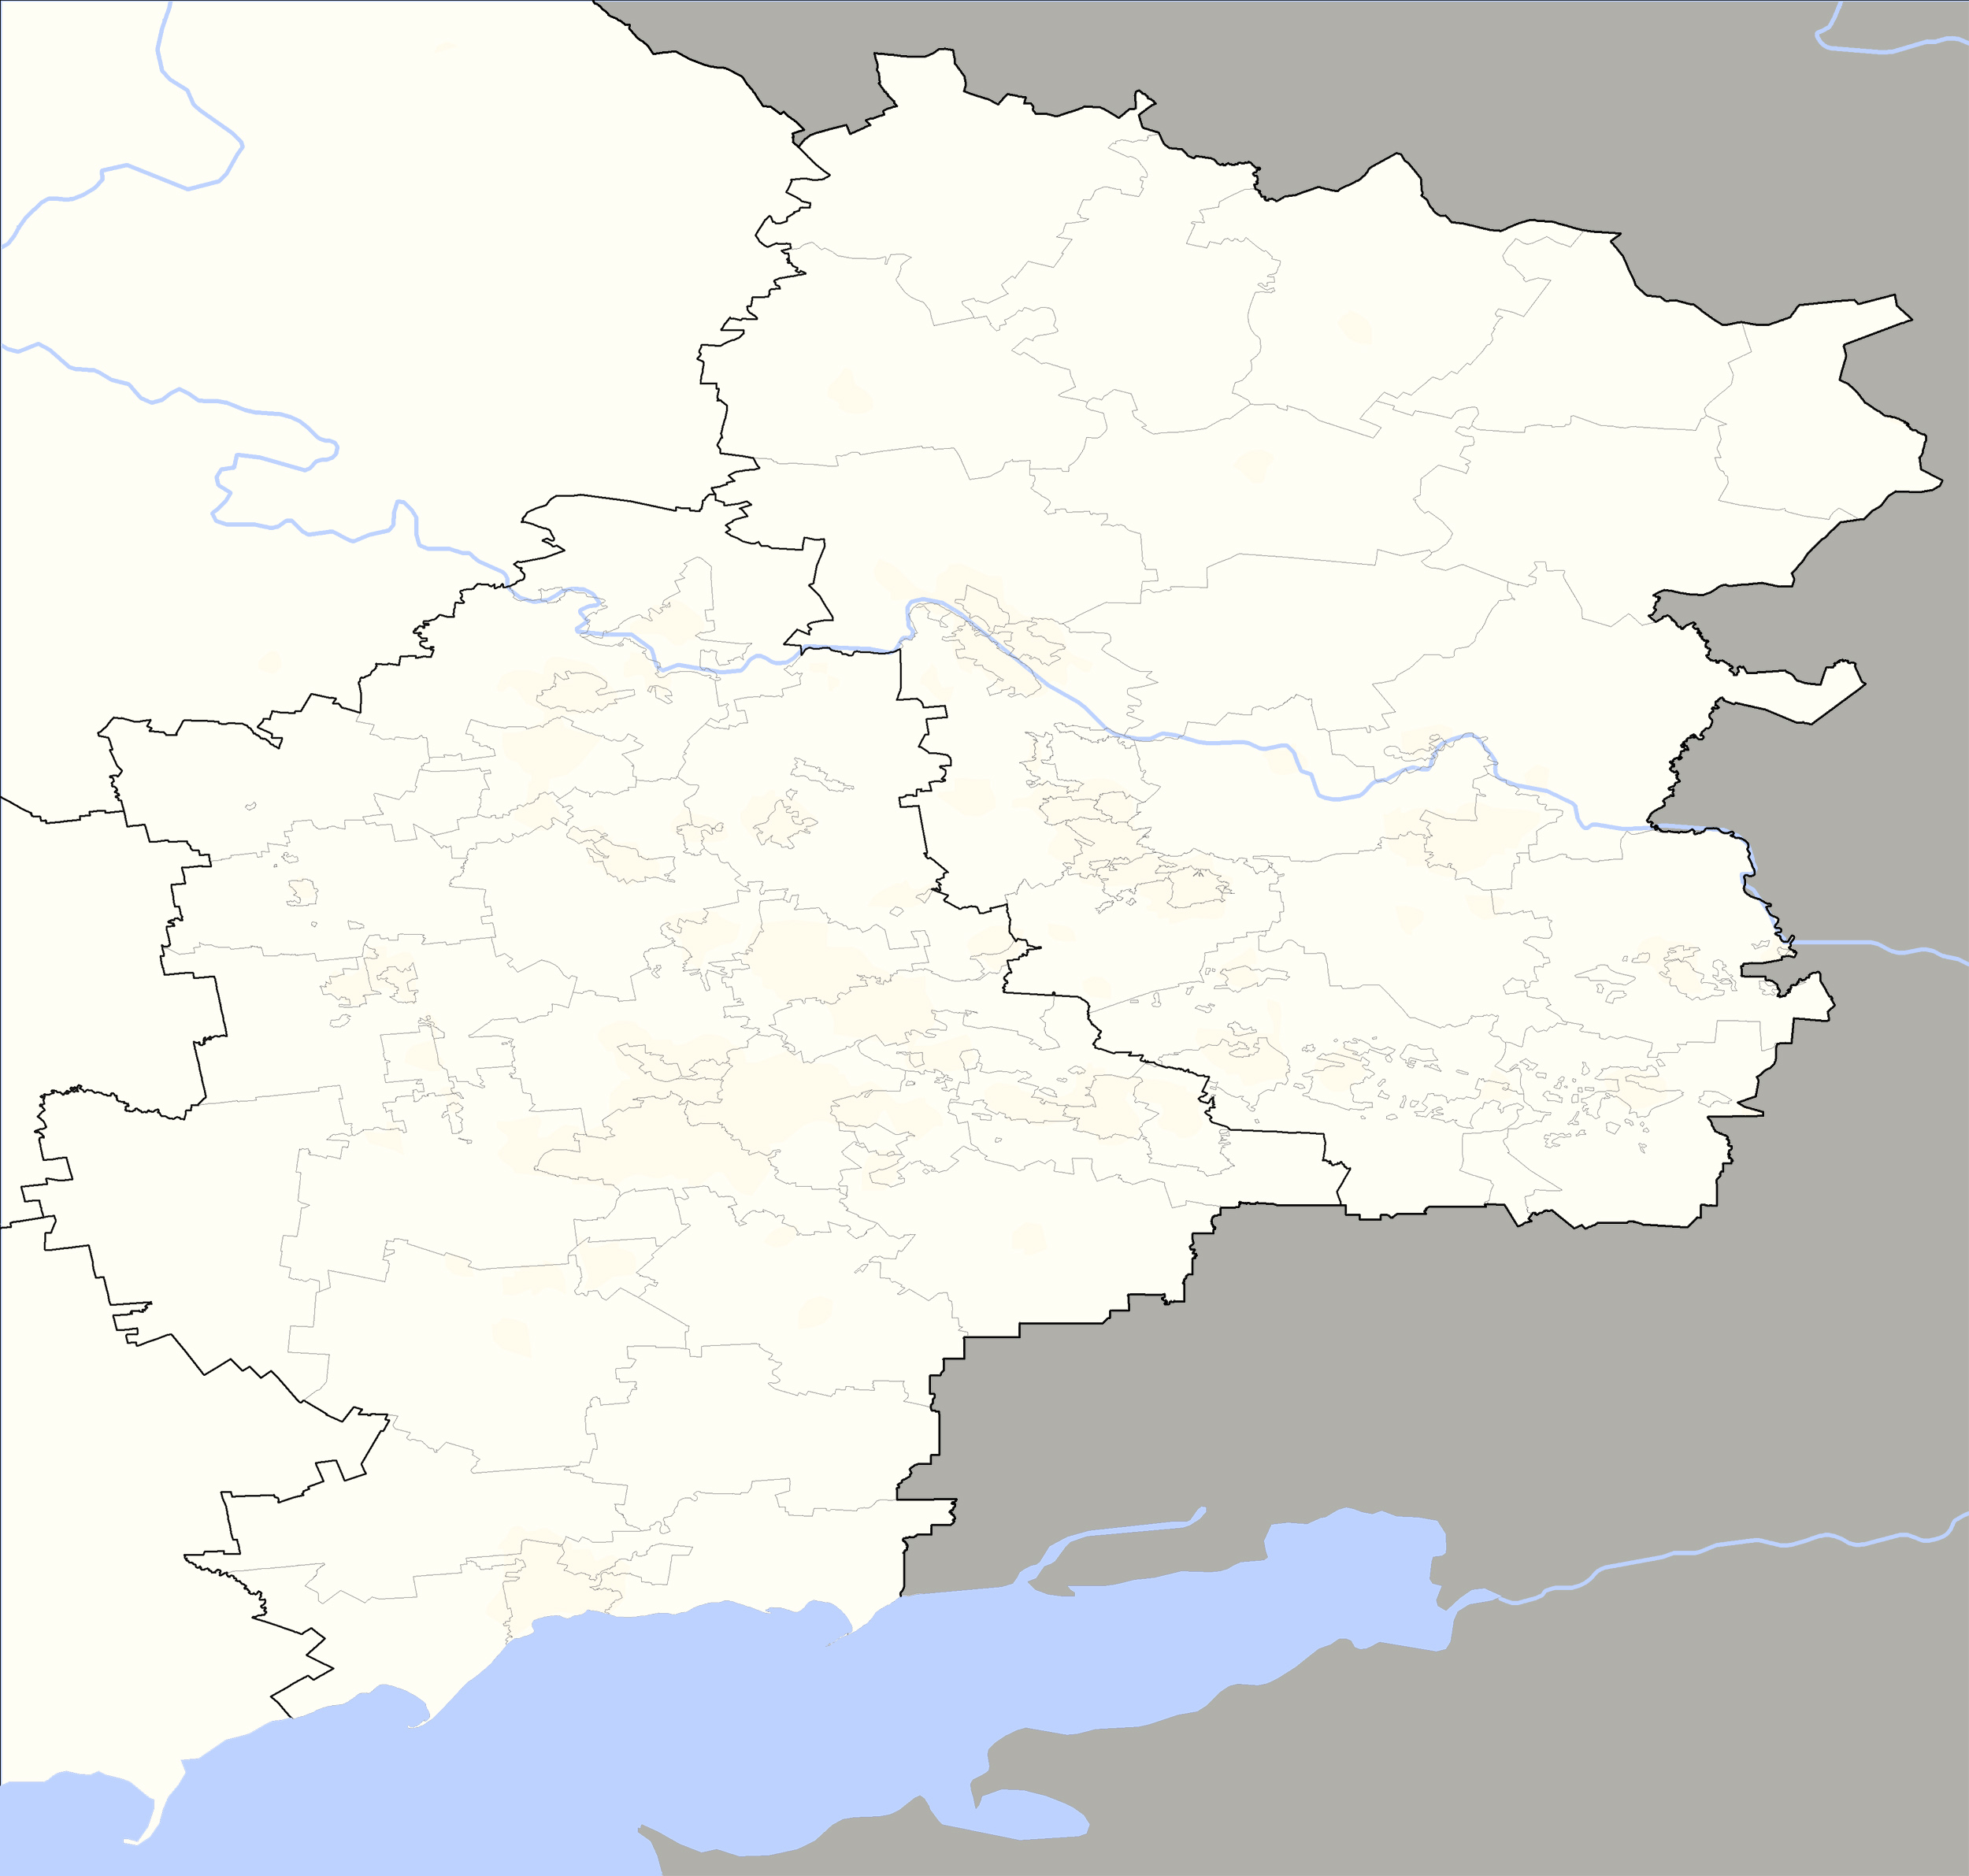 Pietadè/DWDetMap is located in Donbas